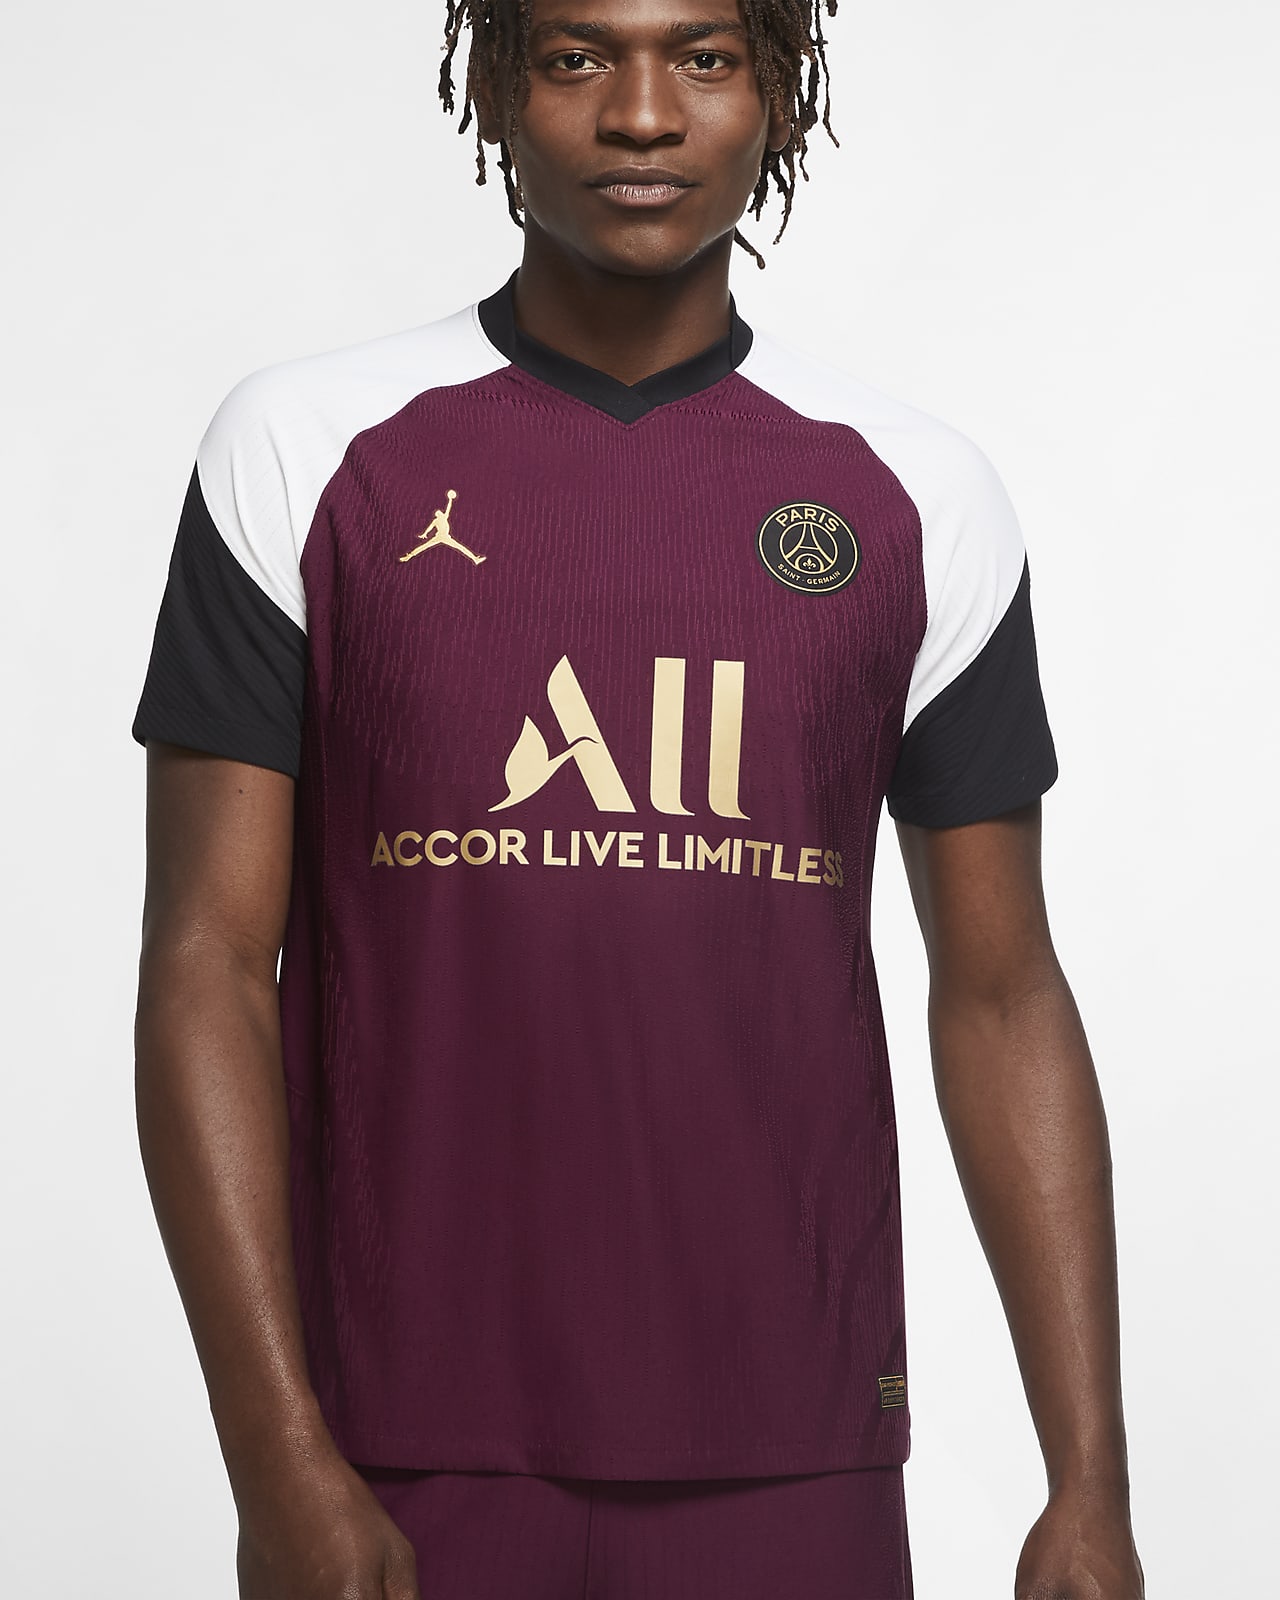 Psg Jersey 2020/21 Third Kit - Nike Launch The Psg 20 21 Home Away ...